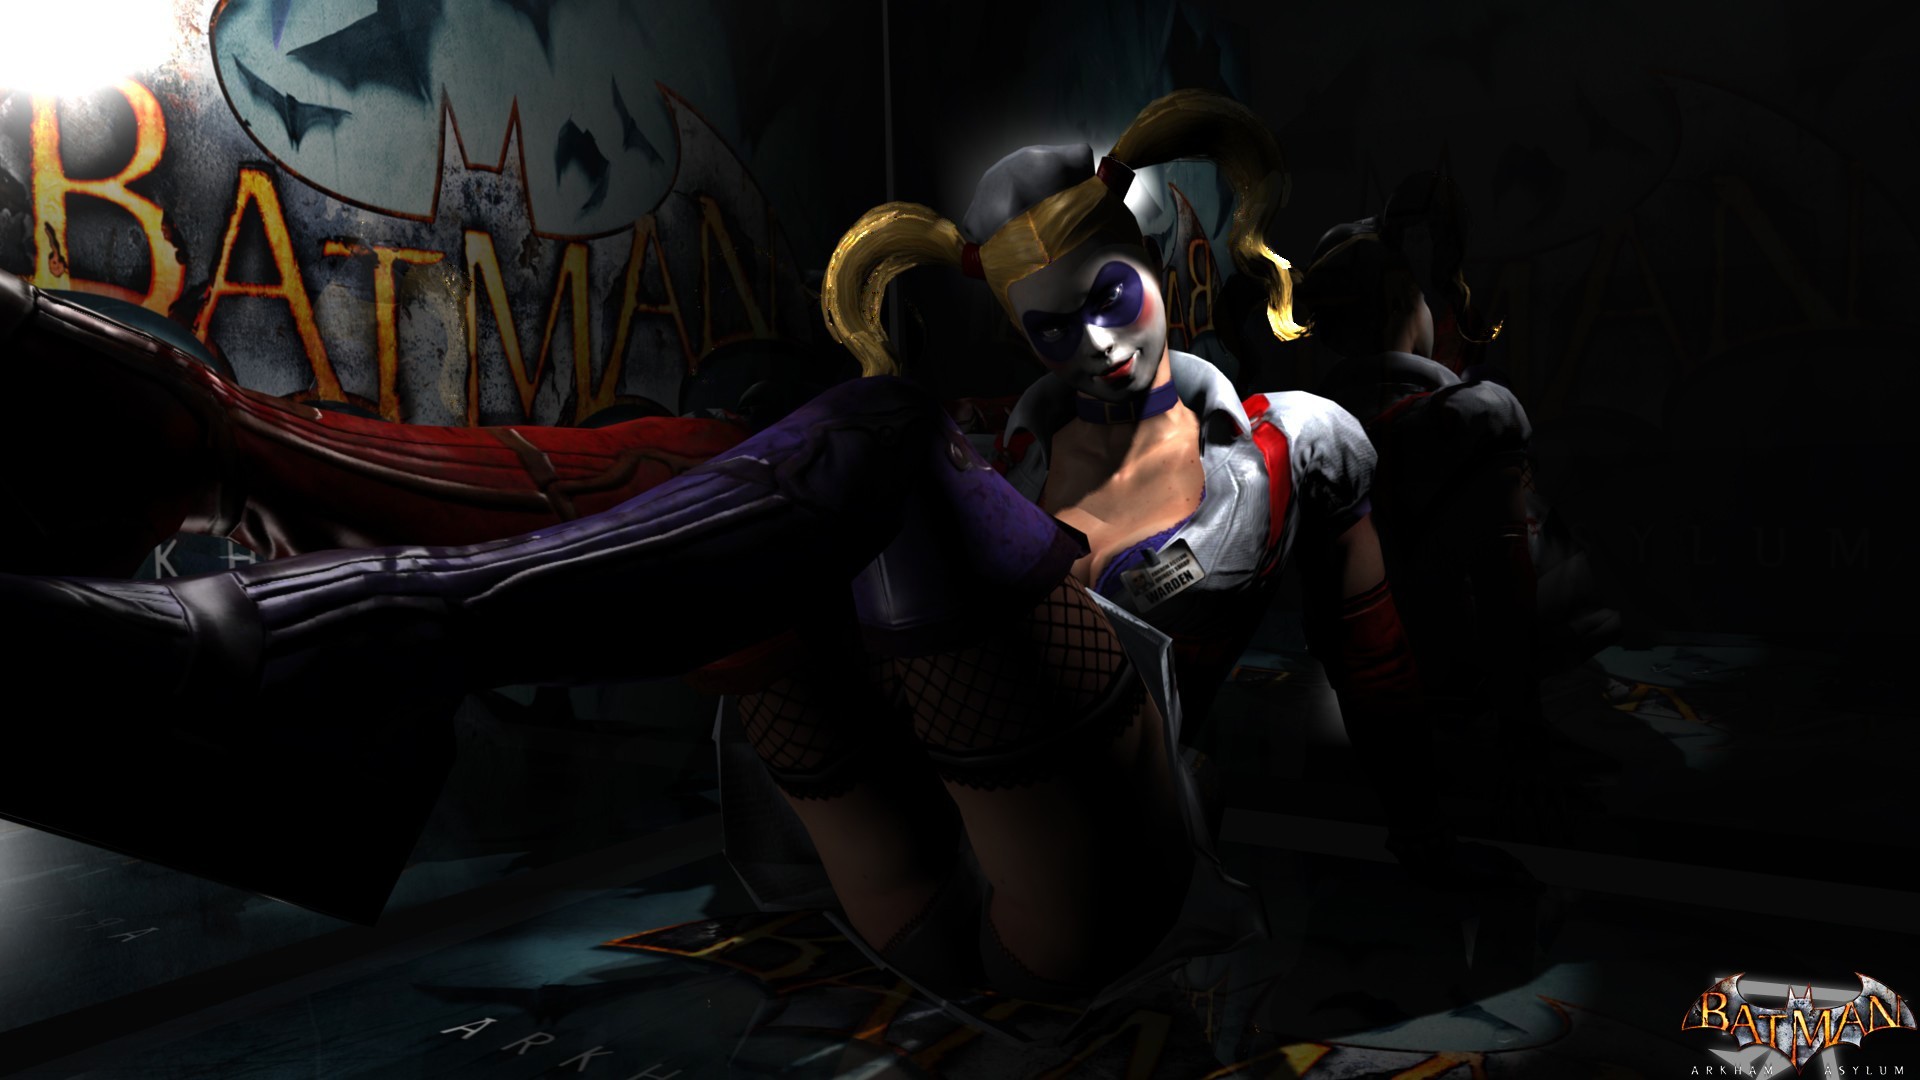 the joker and harley quinn pics – Google Search